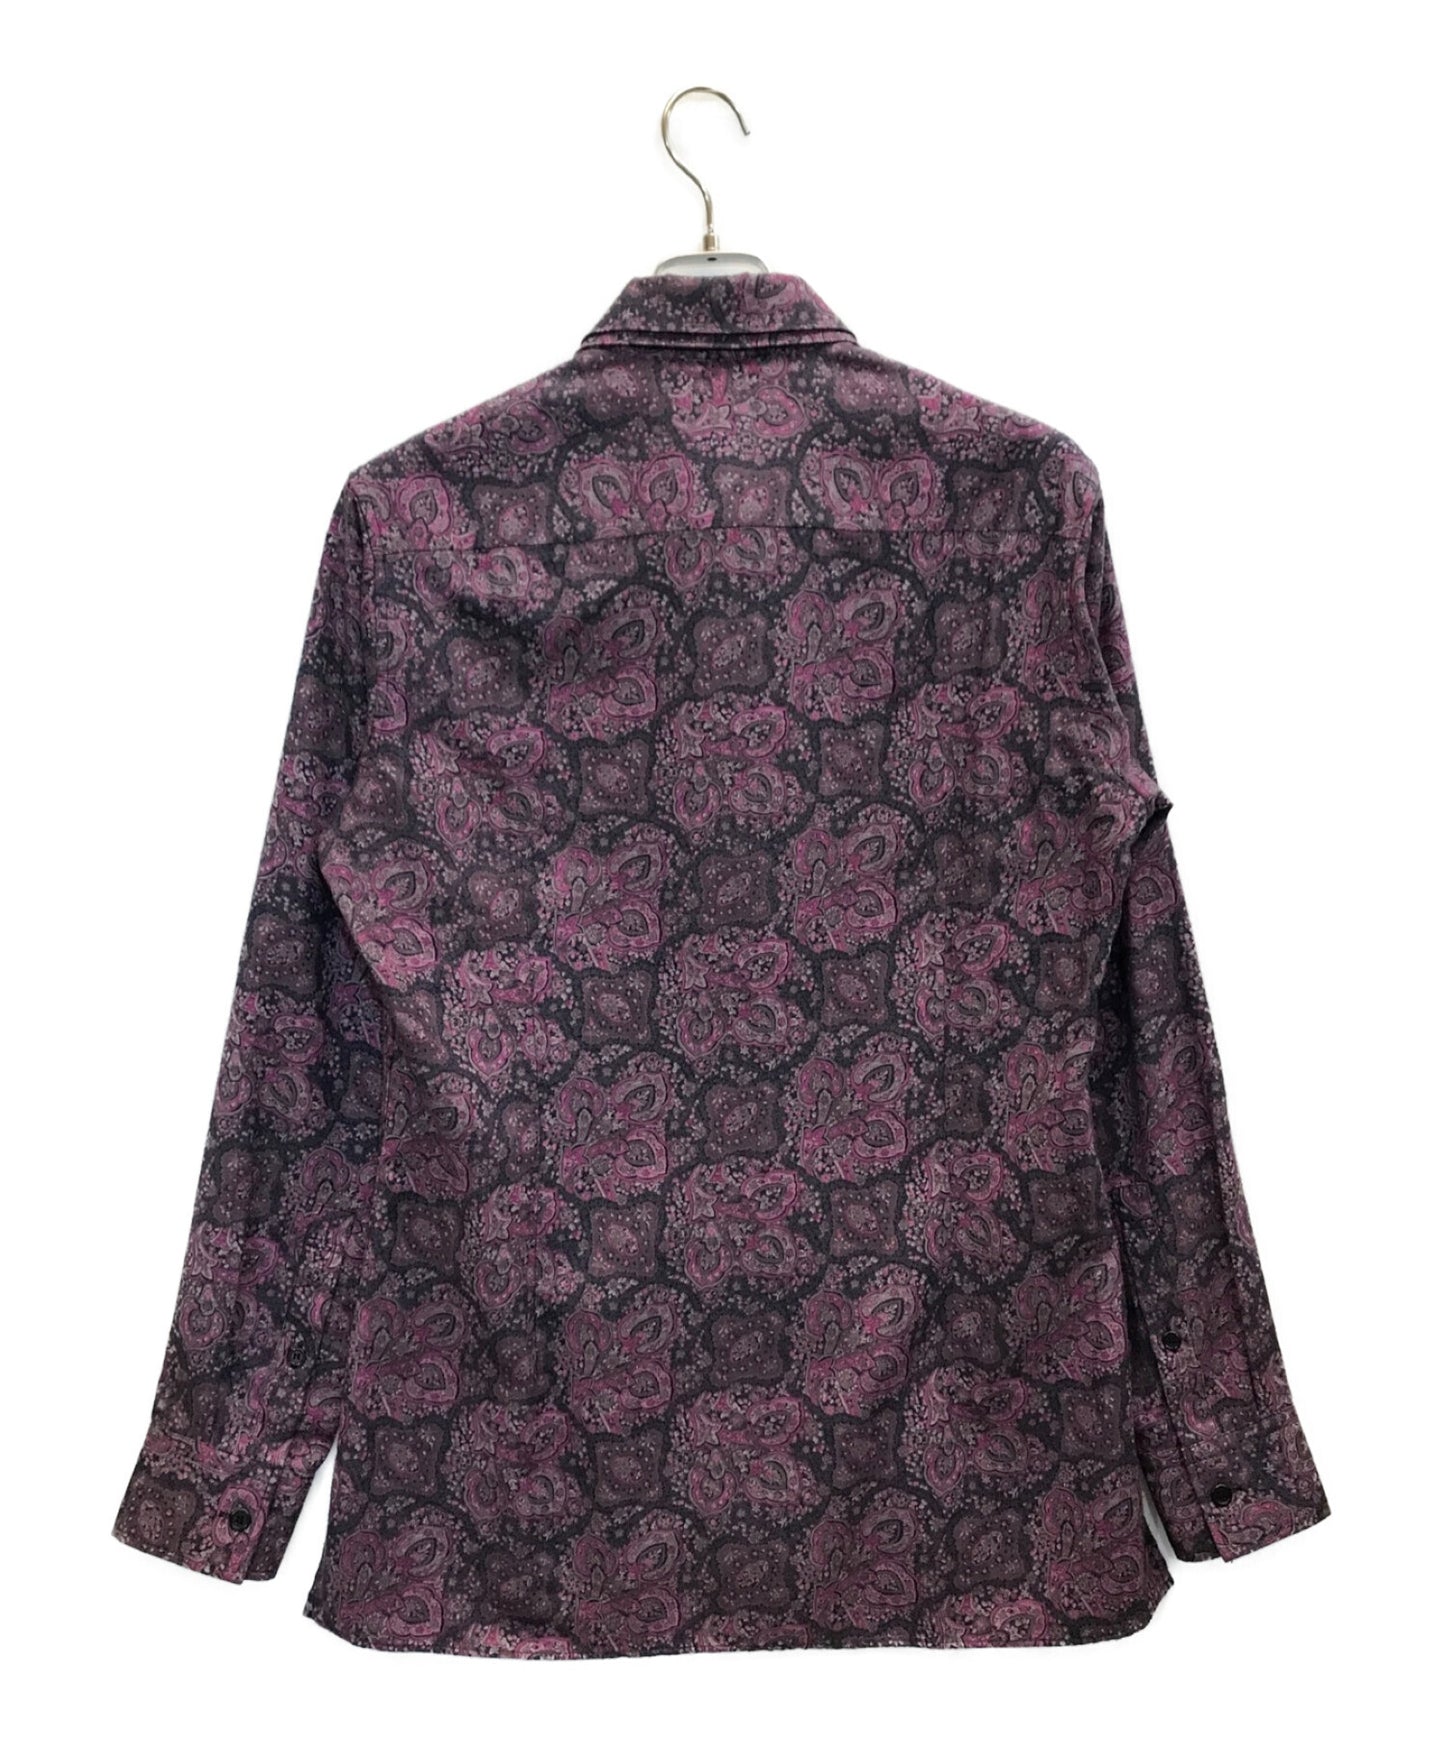 [Pre-owned] Yohji Yamamoto pour homme flower-patterned shirt HF-B07-900